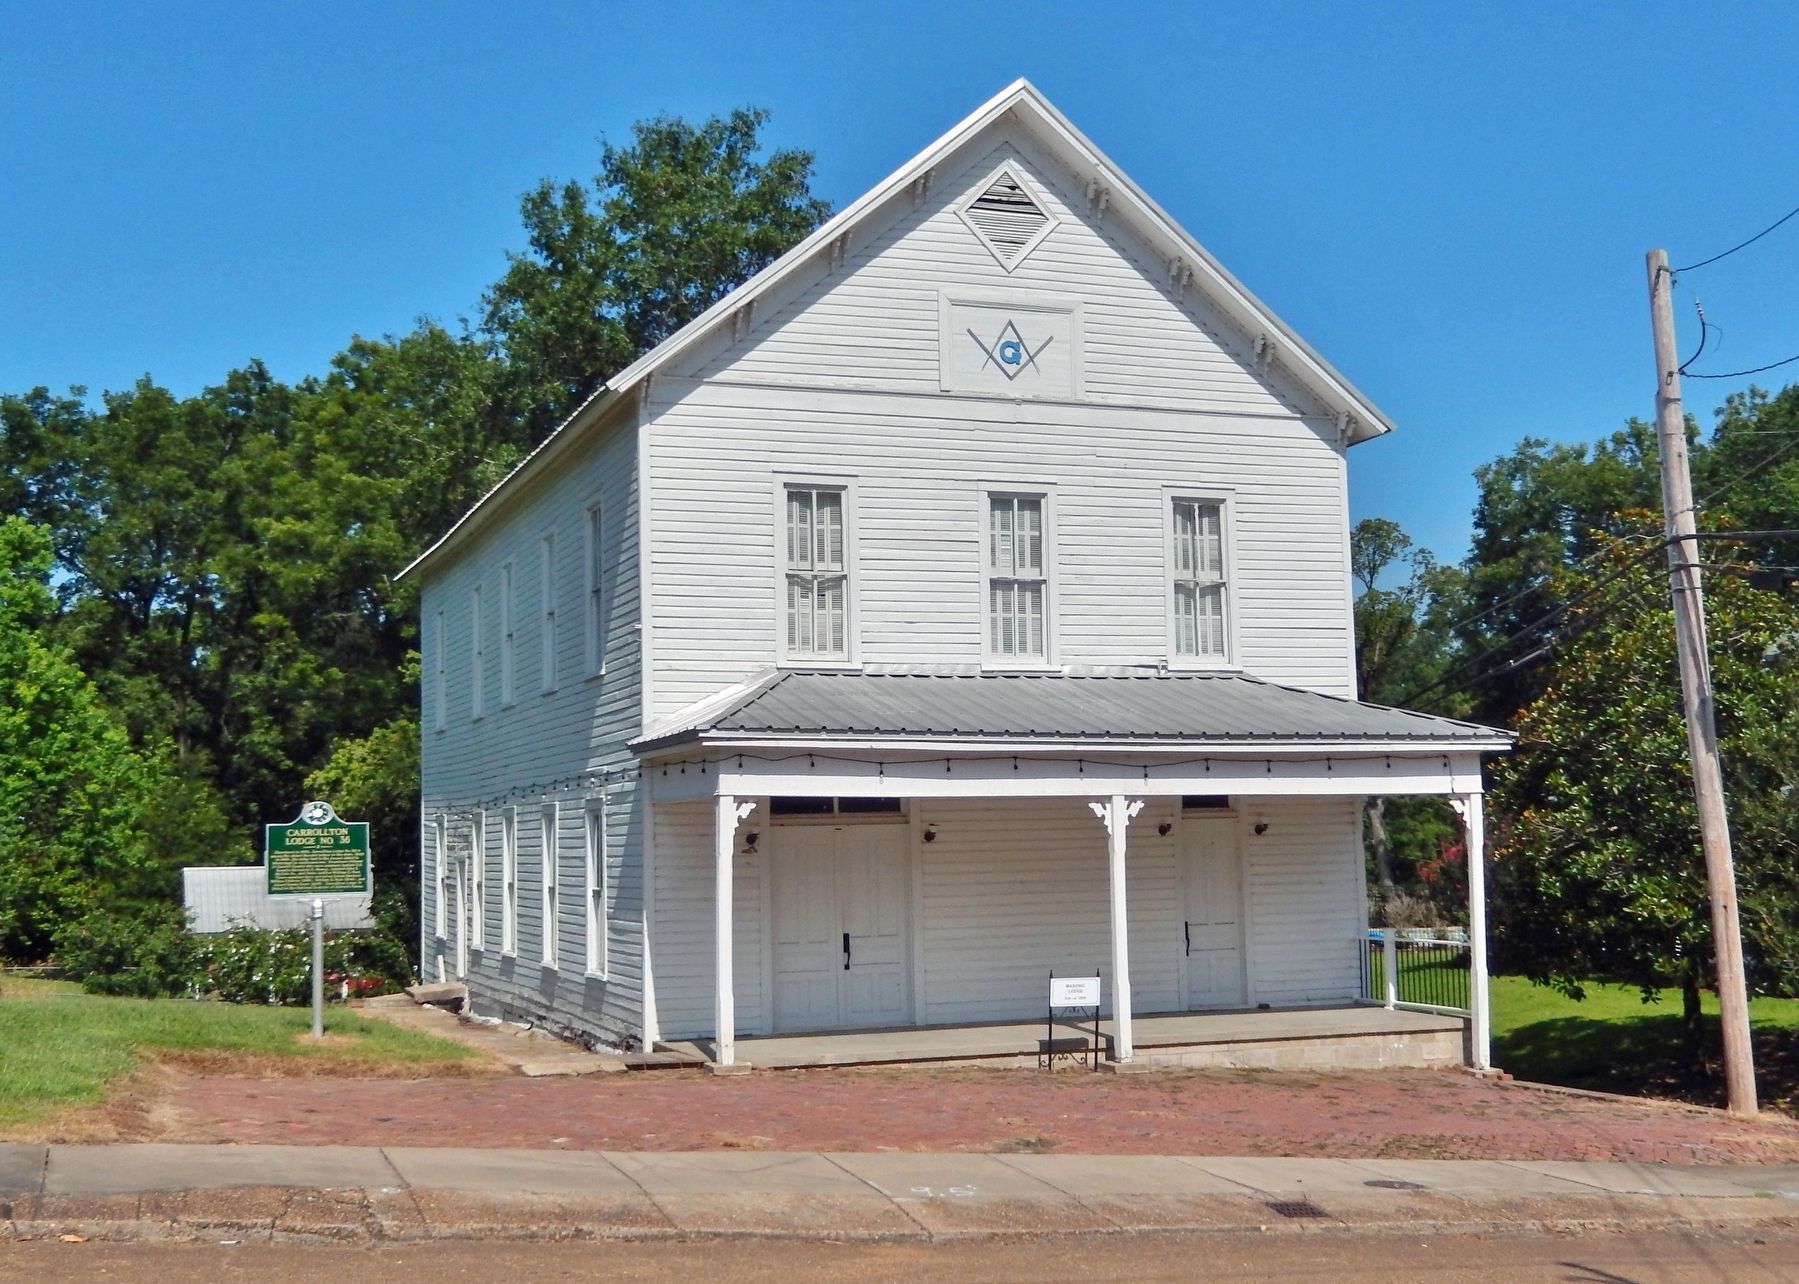 Carrollton Lodge No. 36 (<i>east/front elevation</i>) image. Click for full size.